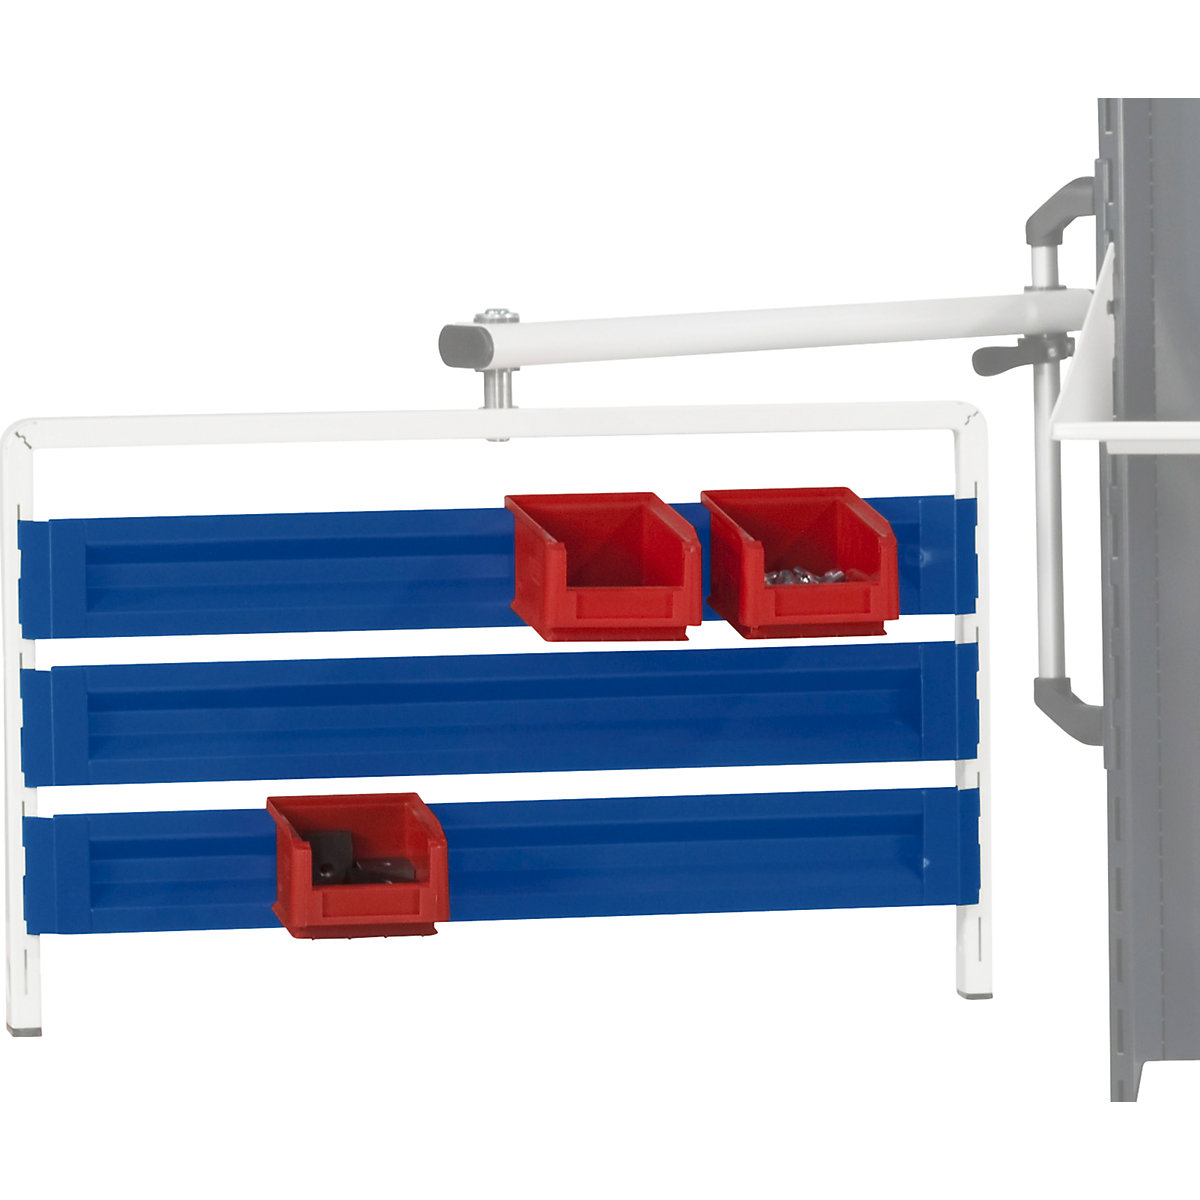 Suspension rail for open fronted storage bins – ANKE, for swivelling base frame, height x width x depth 80 x 651 x 20 mm